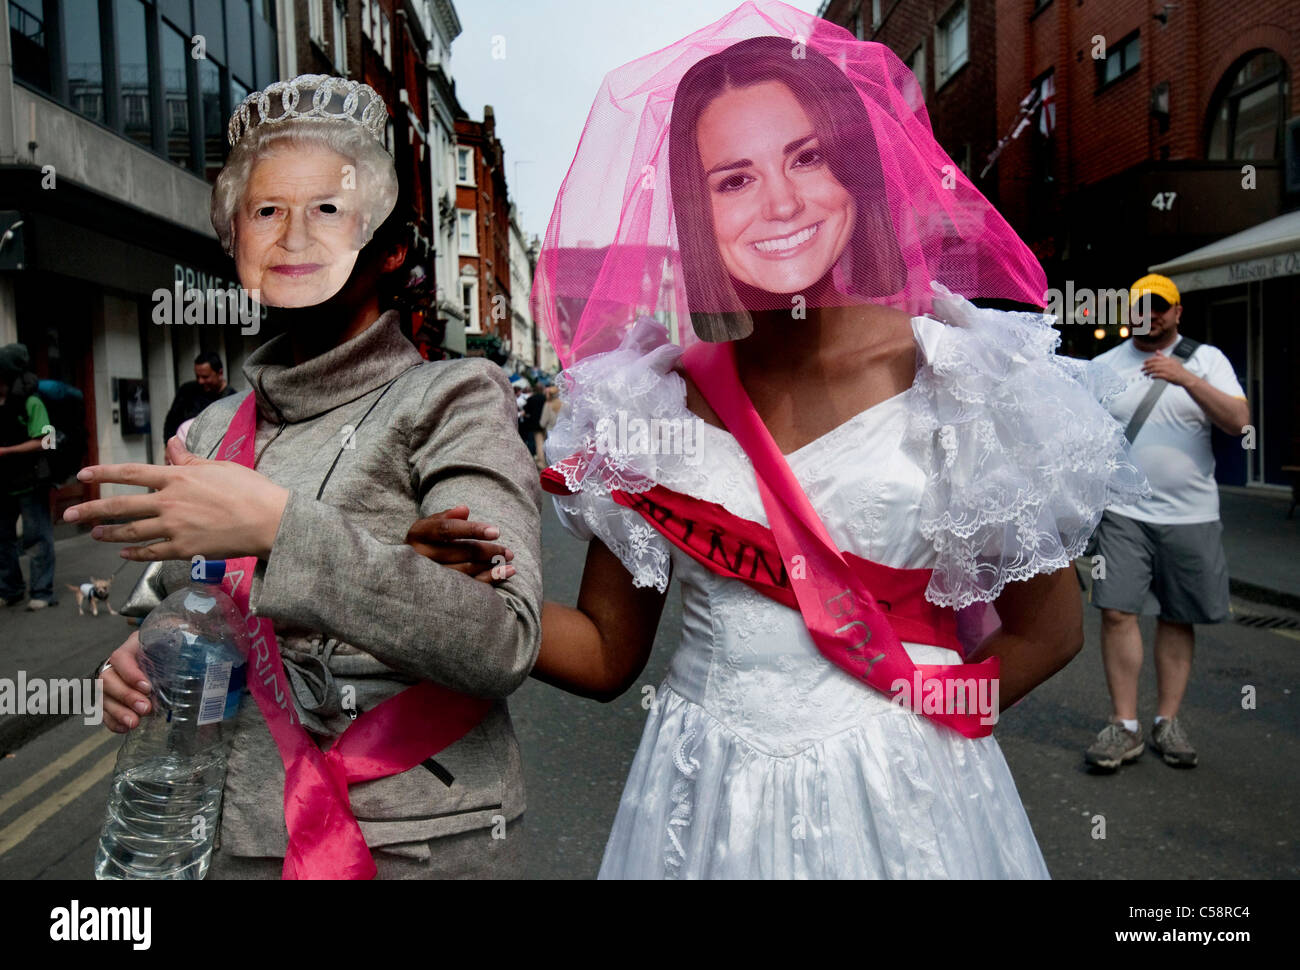 Celebrations in Soho for the Royal Wedding of William and Kate Stock Photo